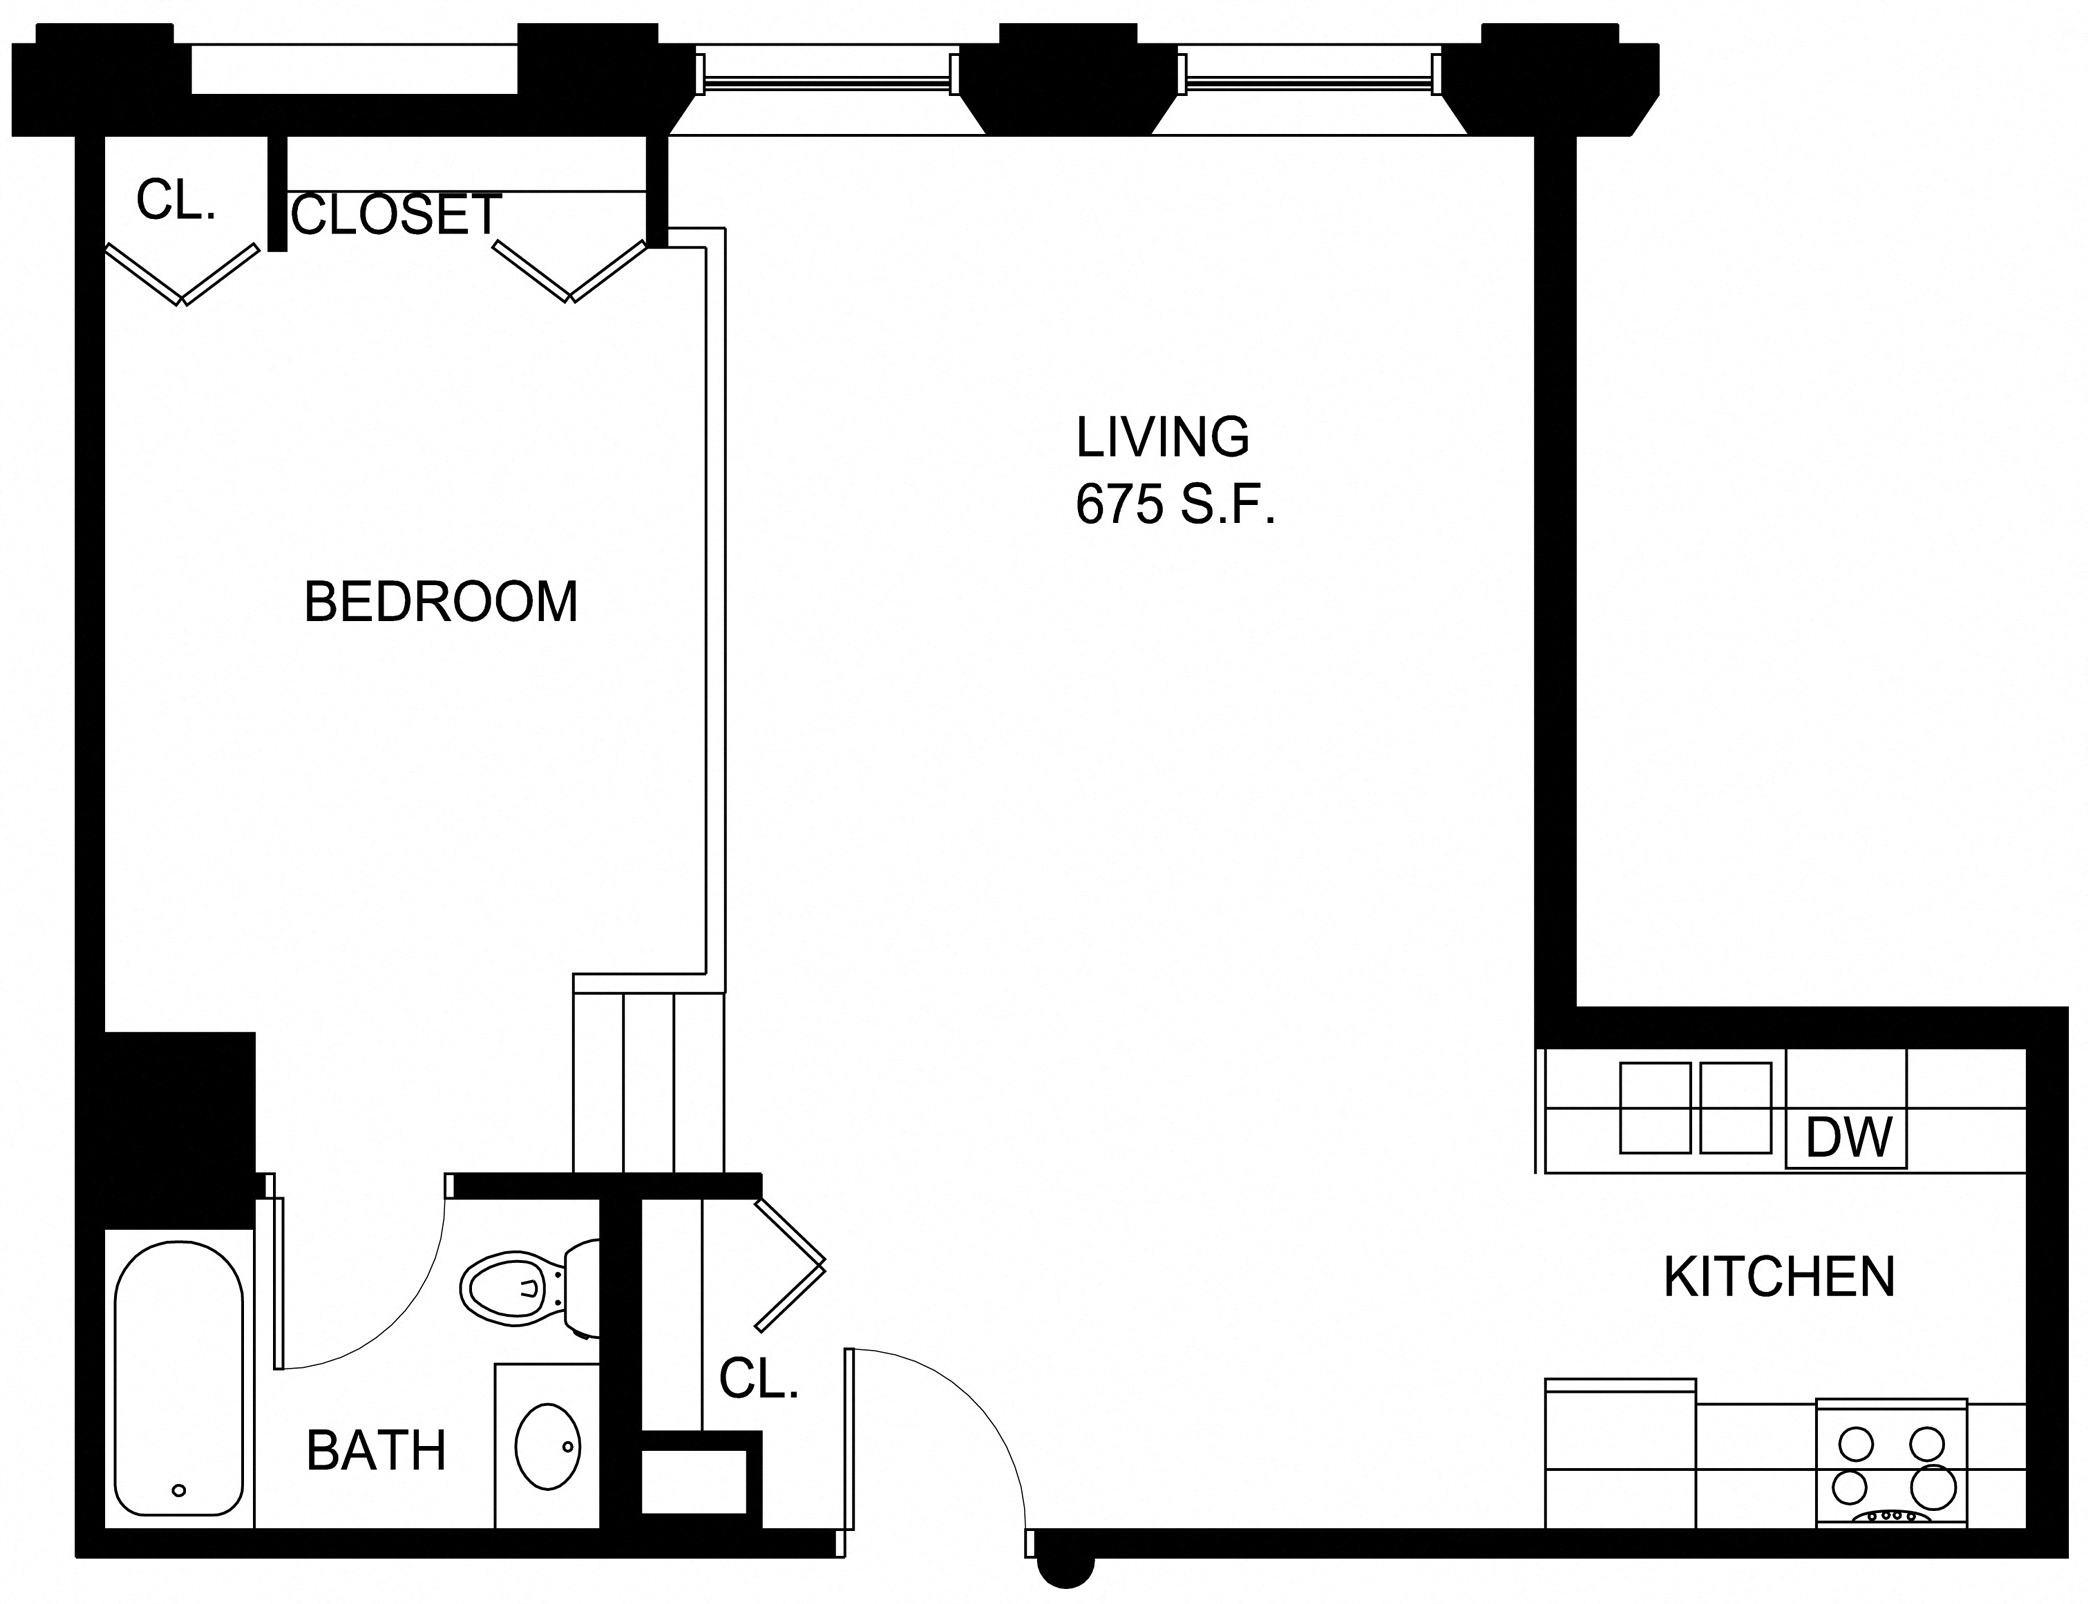 Floorplan for Apartment #P452, 0 bedroom unit at Halstead Providence